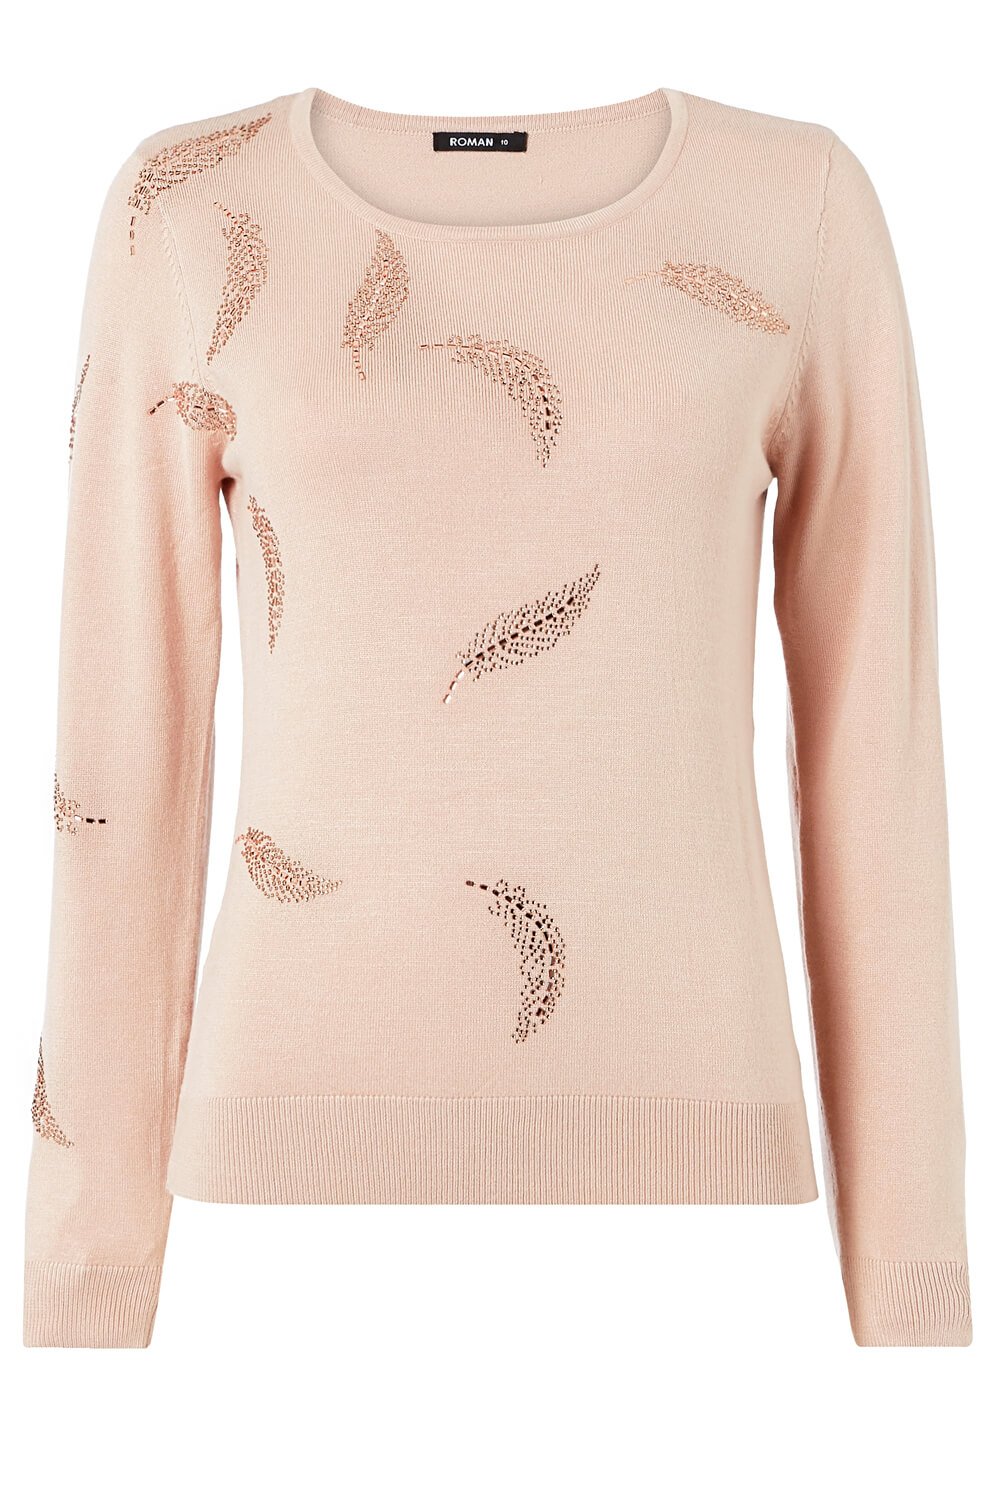 Light Pink Feather Hotfix Jumper, Image 5 of 5